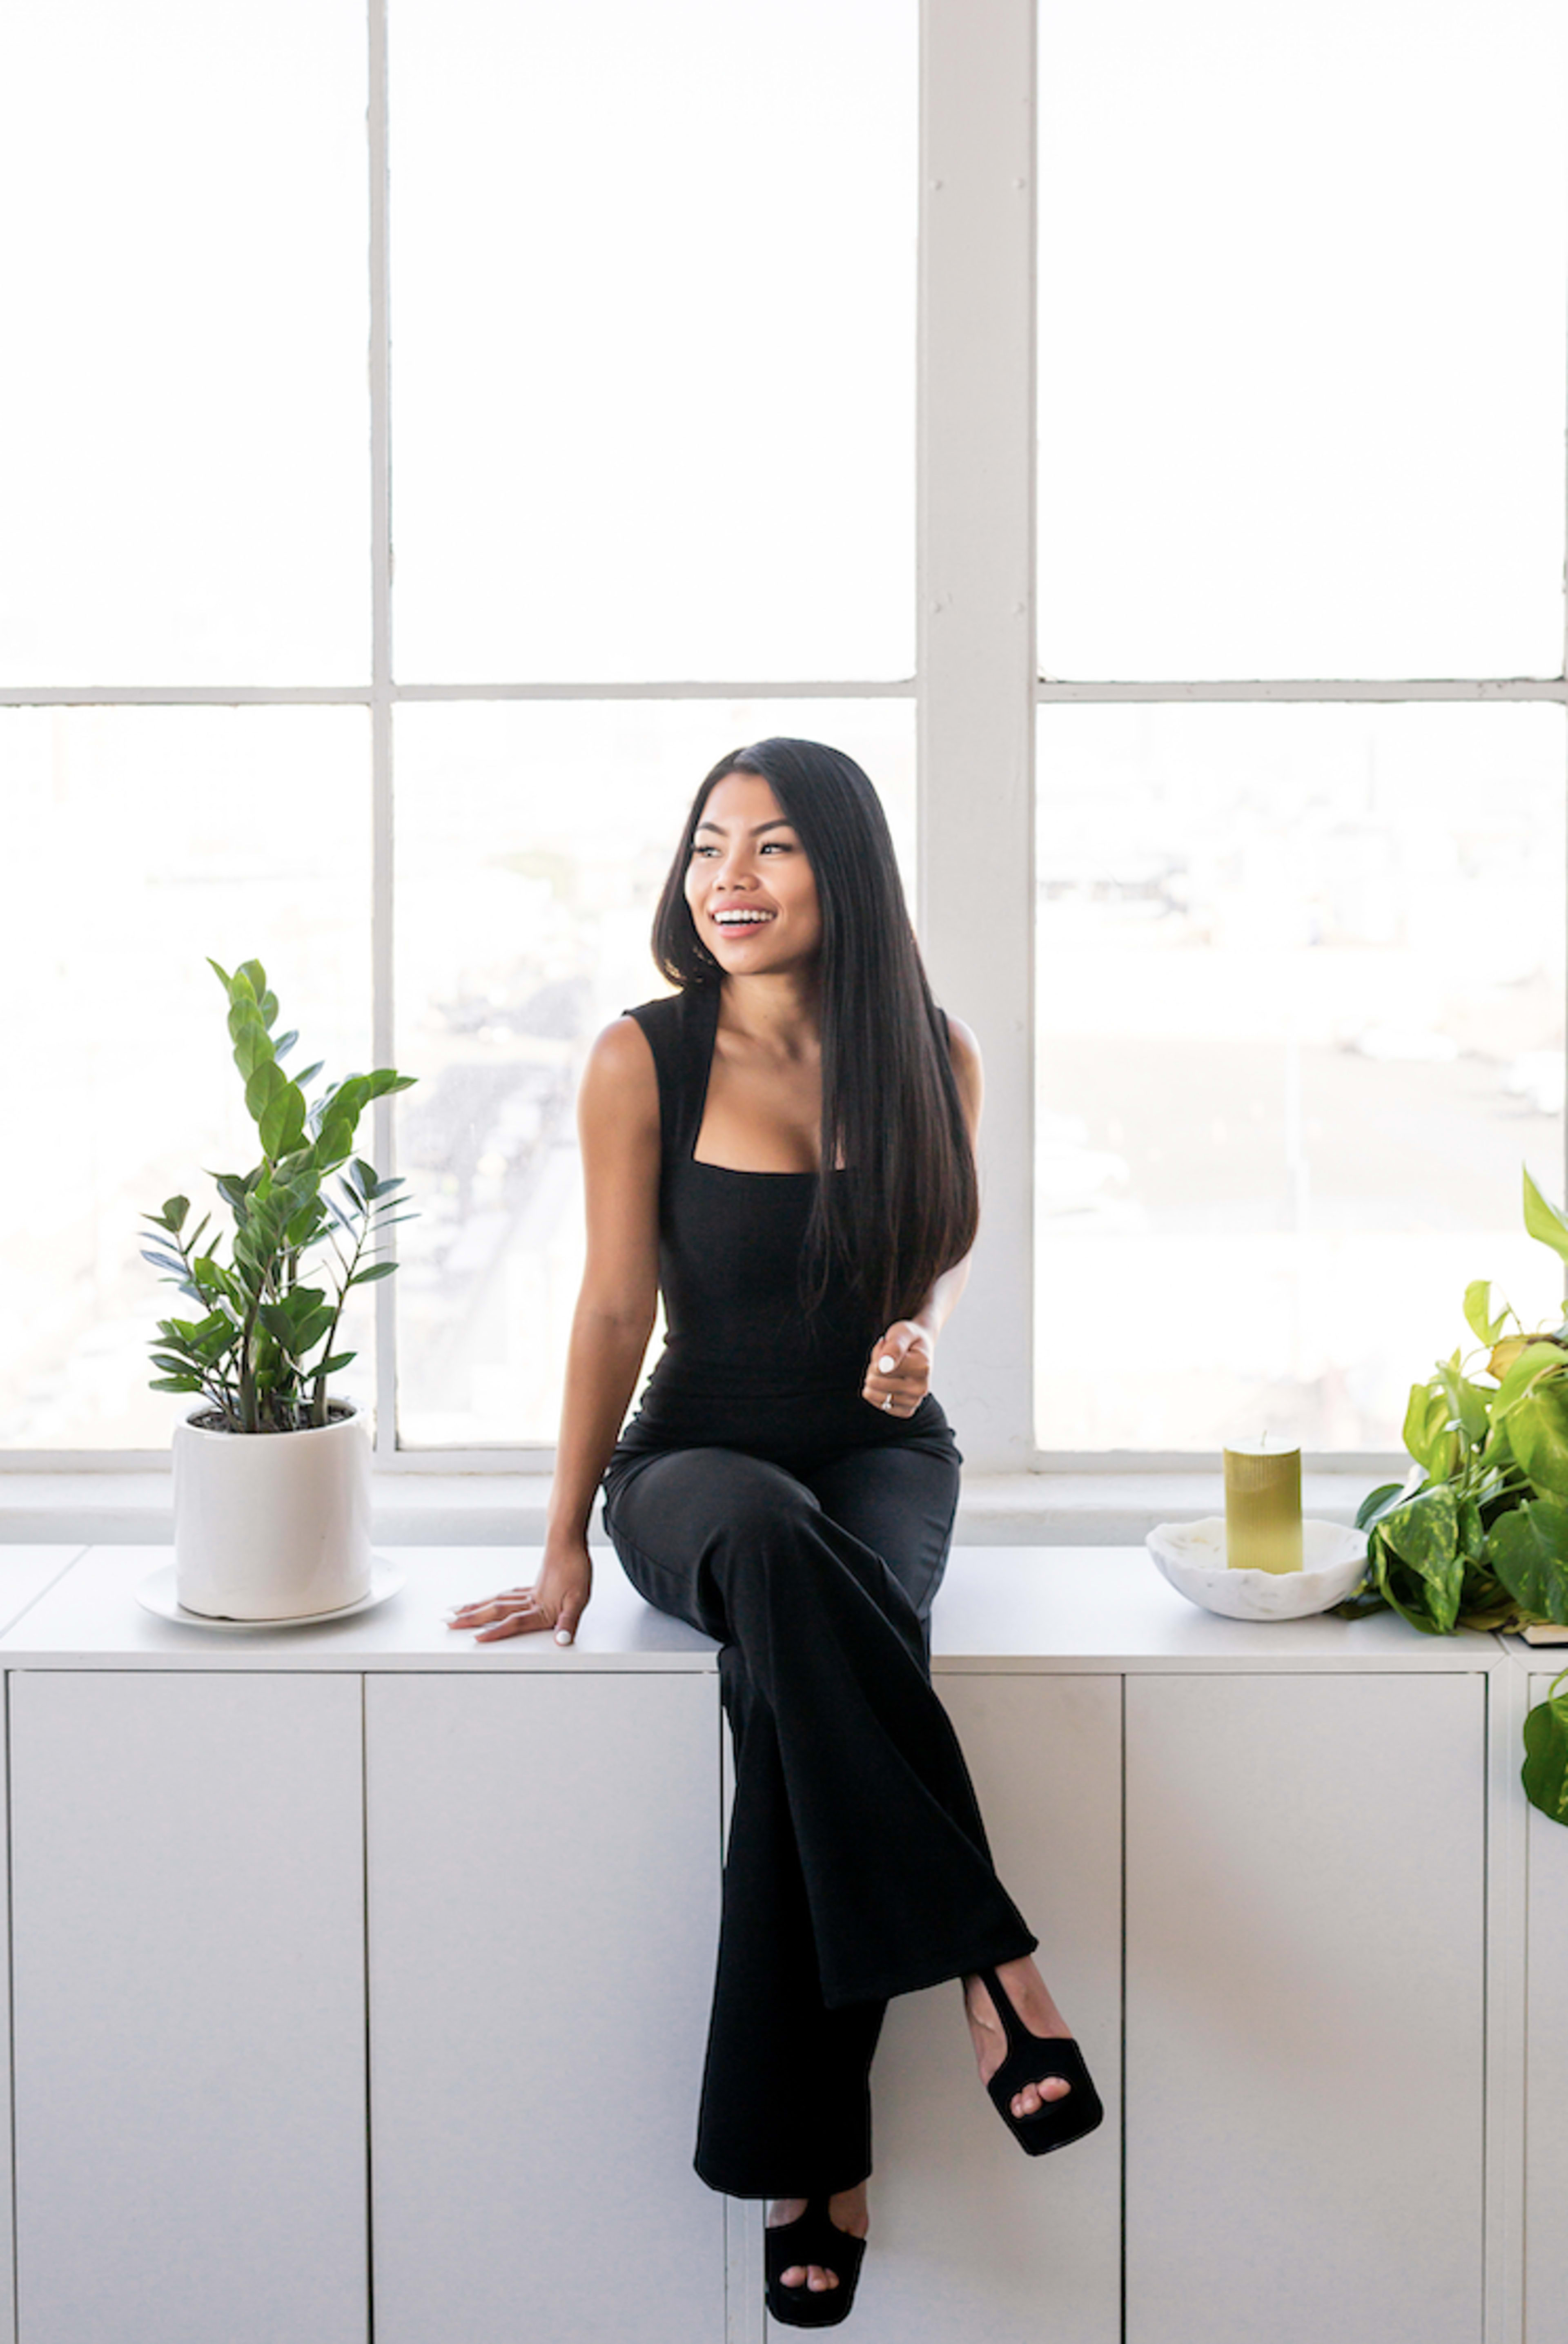 A woman posing for a photo shoot on a white counter in front of a window with plants.